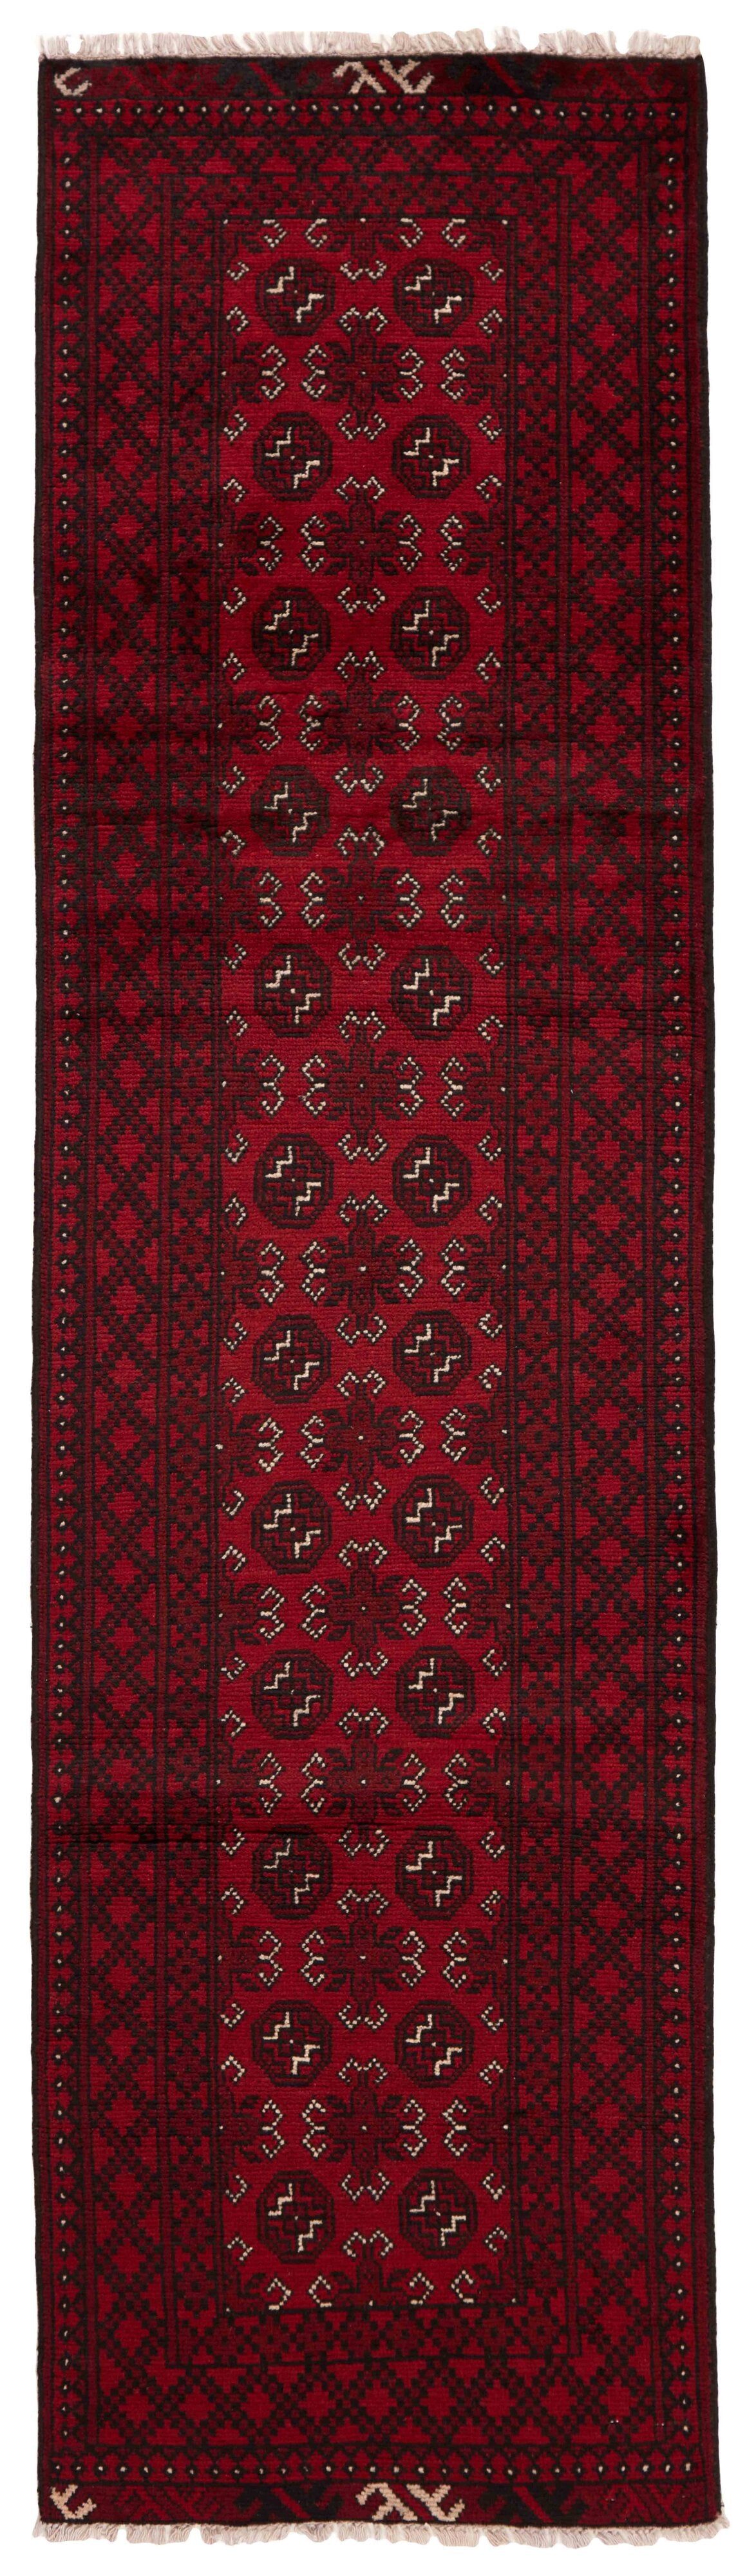 Red oriental runner with traditional Elephant's foot pattern